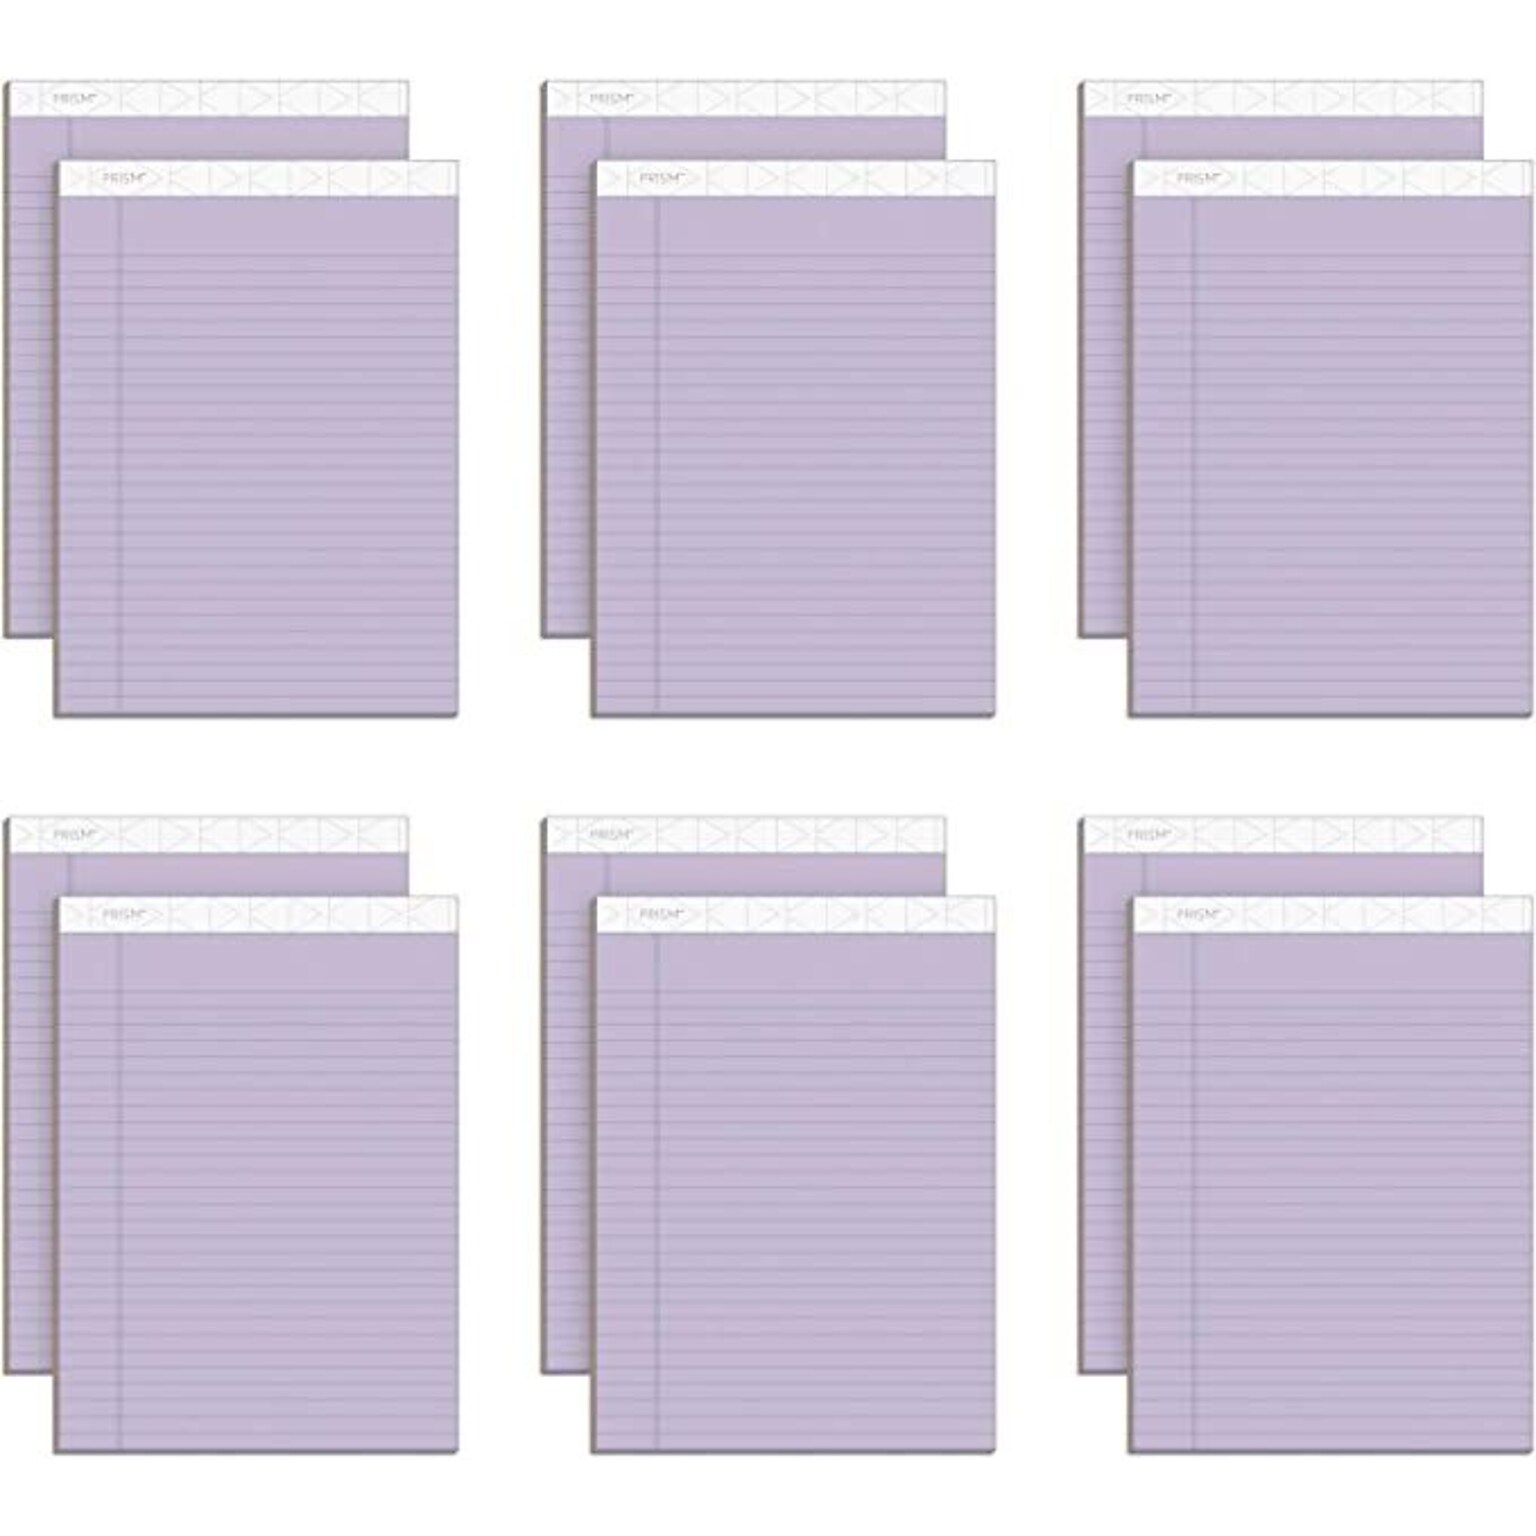 TOPS Prism+ Legal Notepads, 5 x 8, Narrow Ruled, Orchid, 50 Sheets/Pad, 12 Pads/Pack (63040)